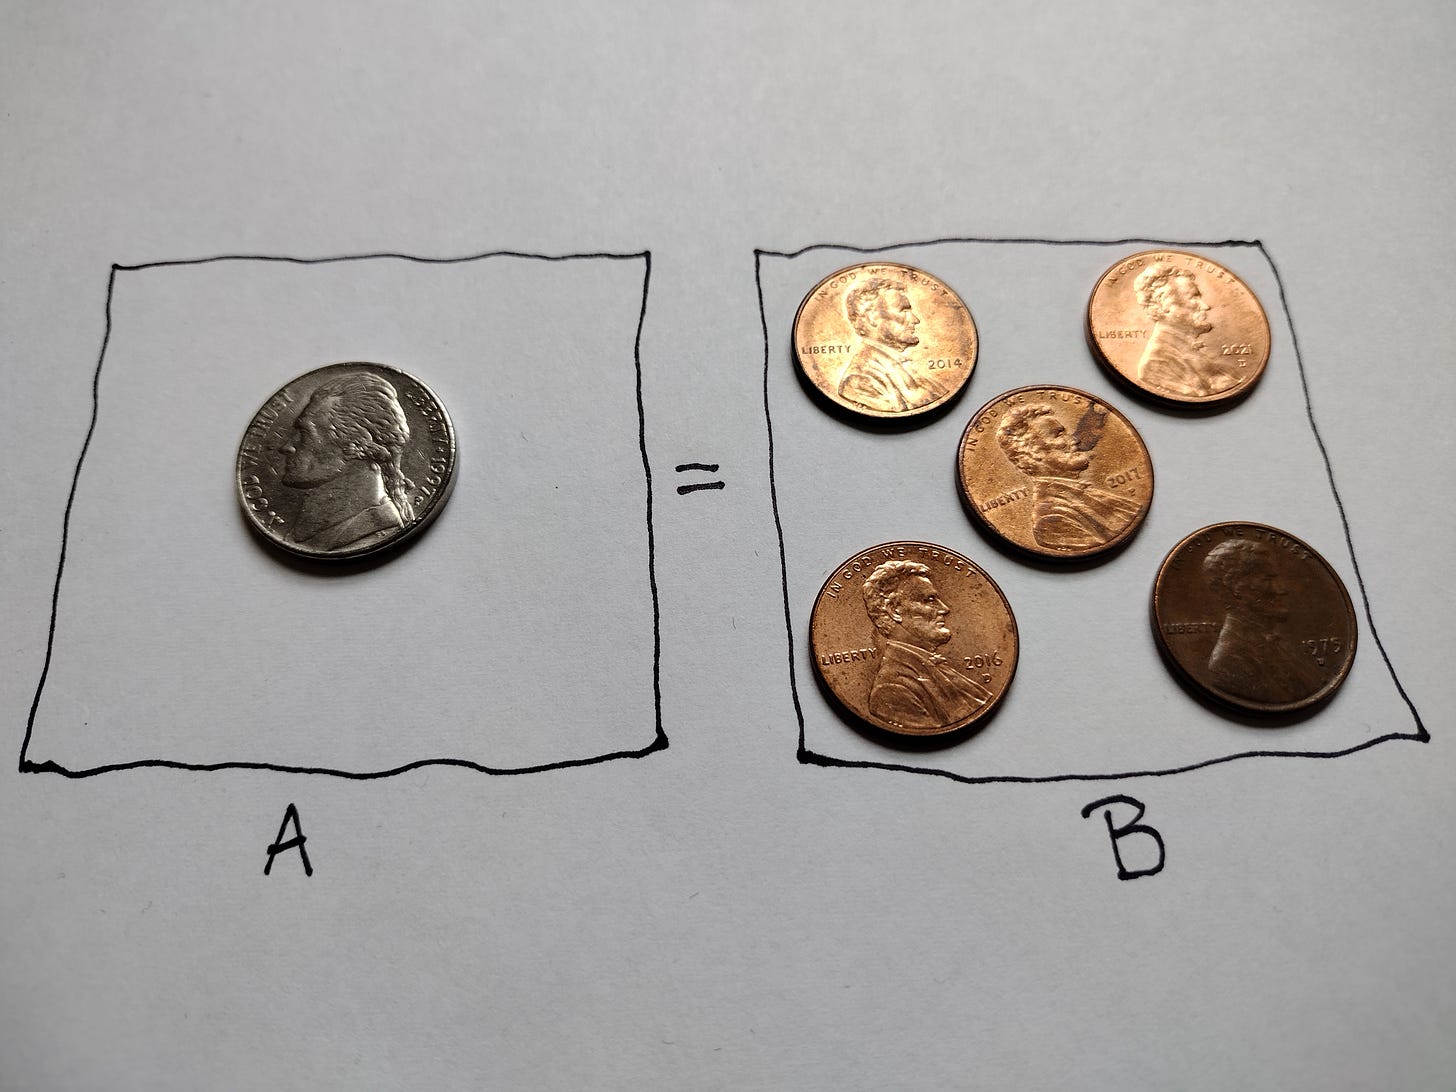 A photo of two large squares drawn in ink, one labeled A and the other labeled B.  Box A contains a nickel;  Box B contains five pennies.  There is an equal sign represented between the two boxes.